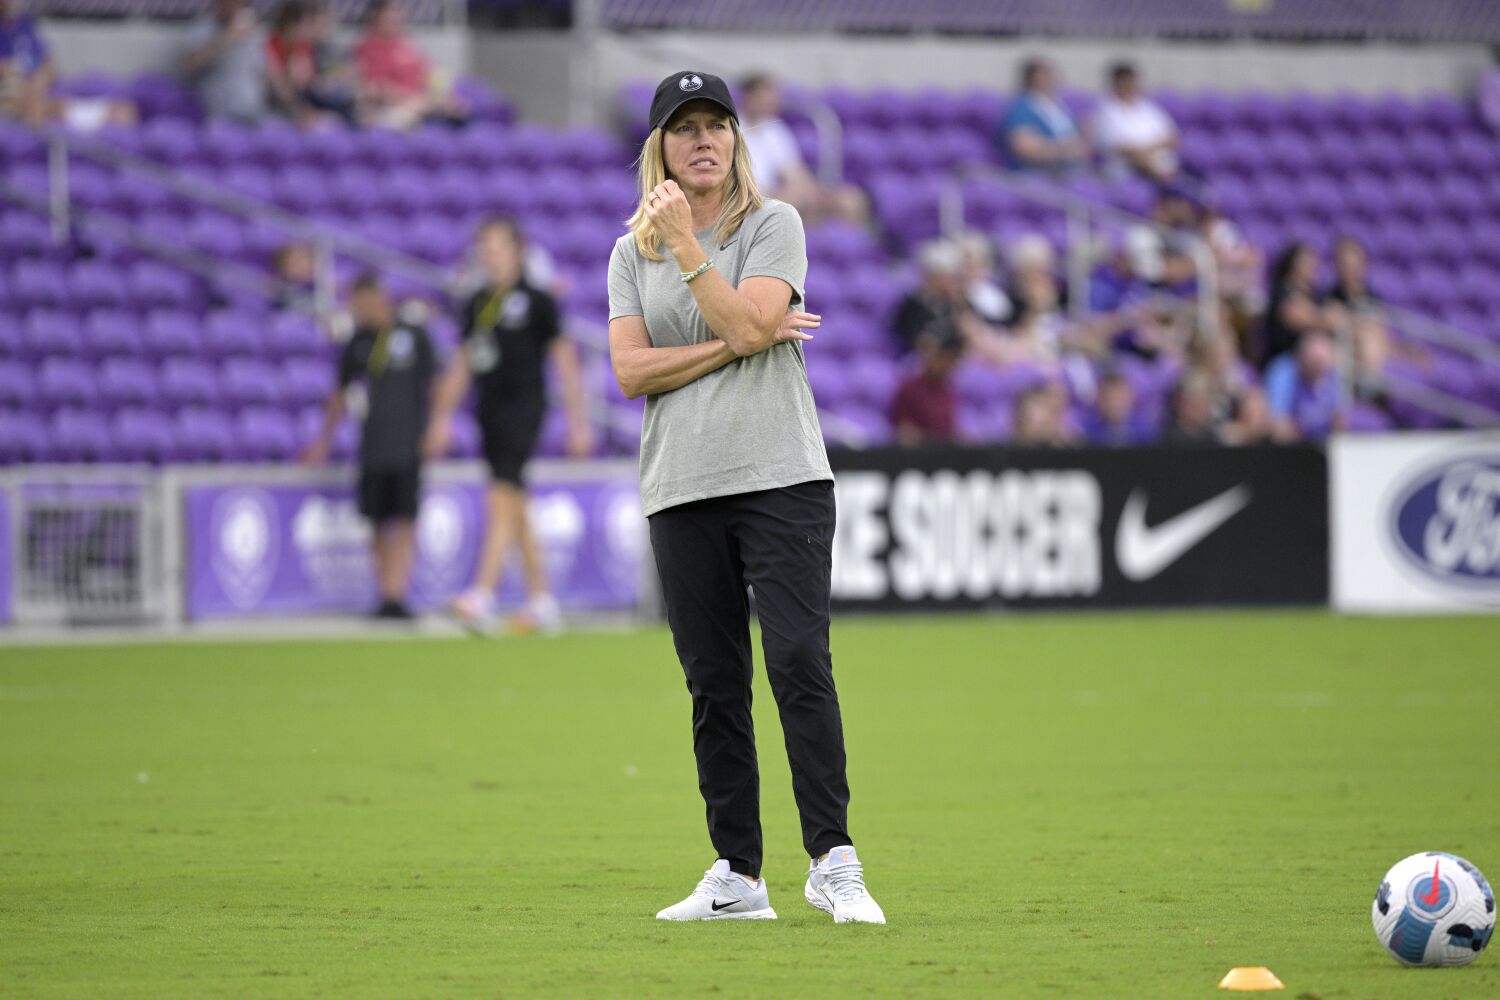 Former UCLA coach Amanda Cromwell banned from NWSL following abuse investigation